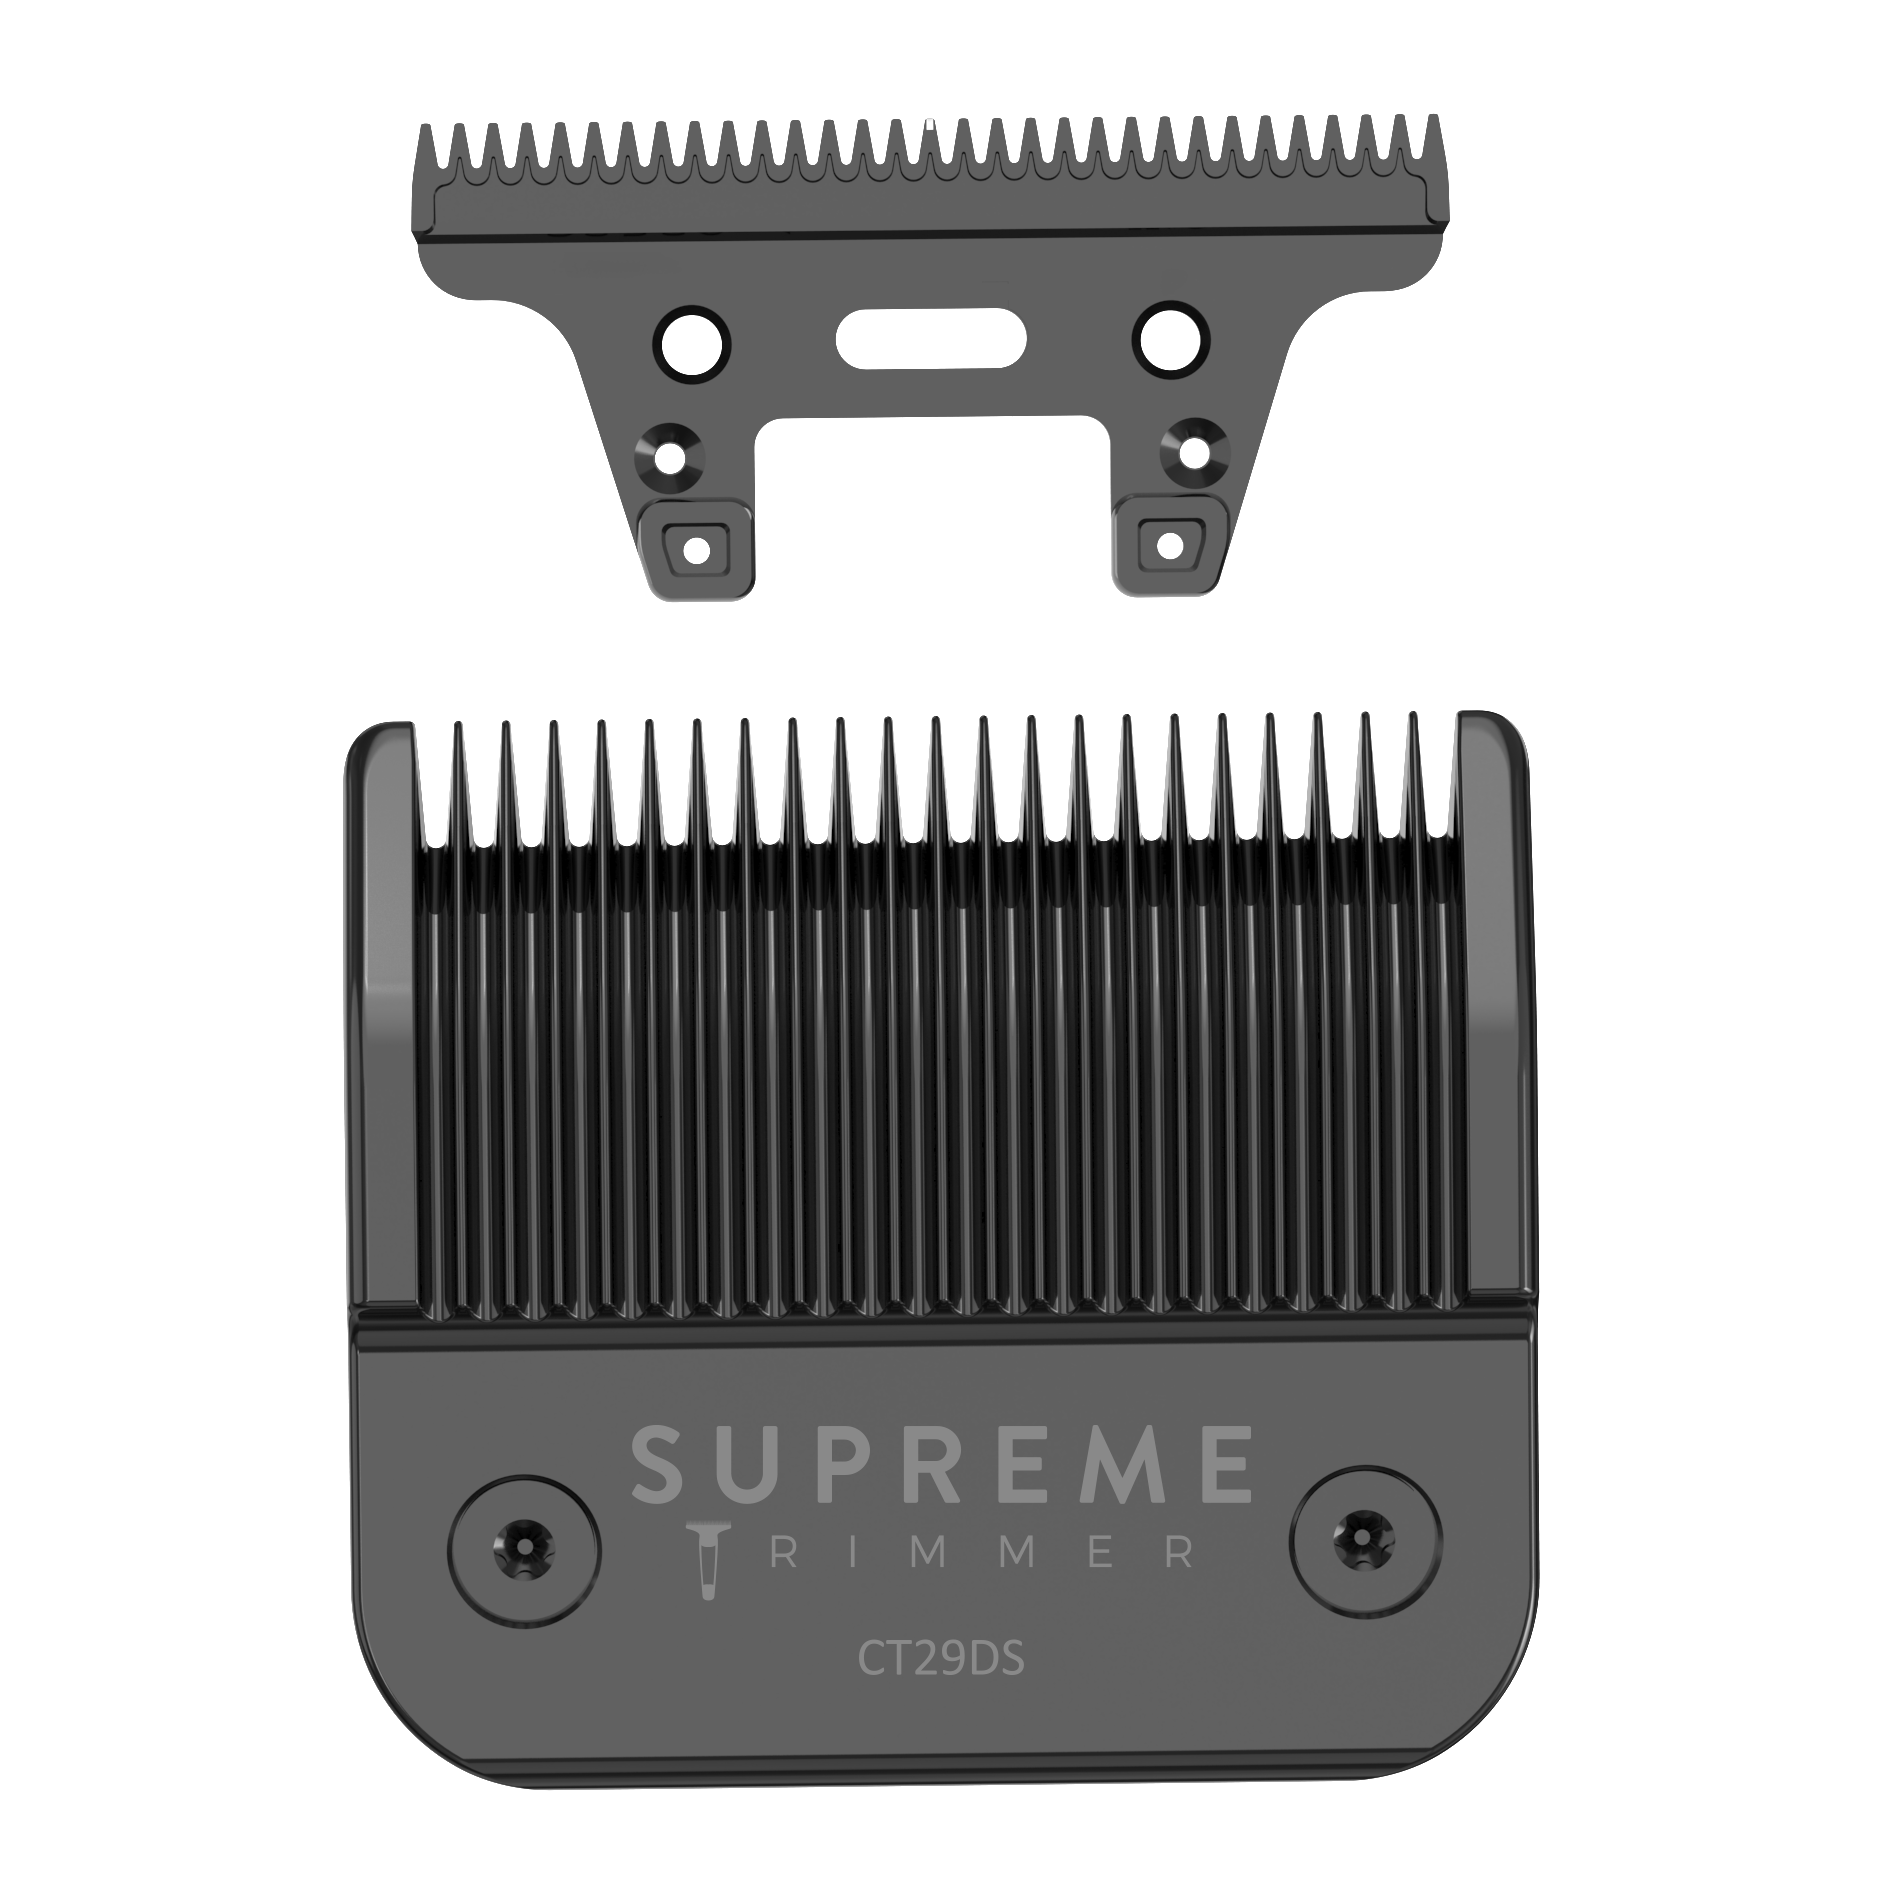 Detachable Taper Blade CT29DS - Hair Clipper Replacement Blades - Supreme Trimmer Mens Trimmer Grooming kit 